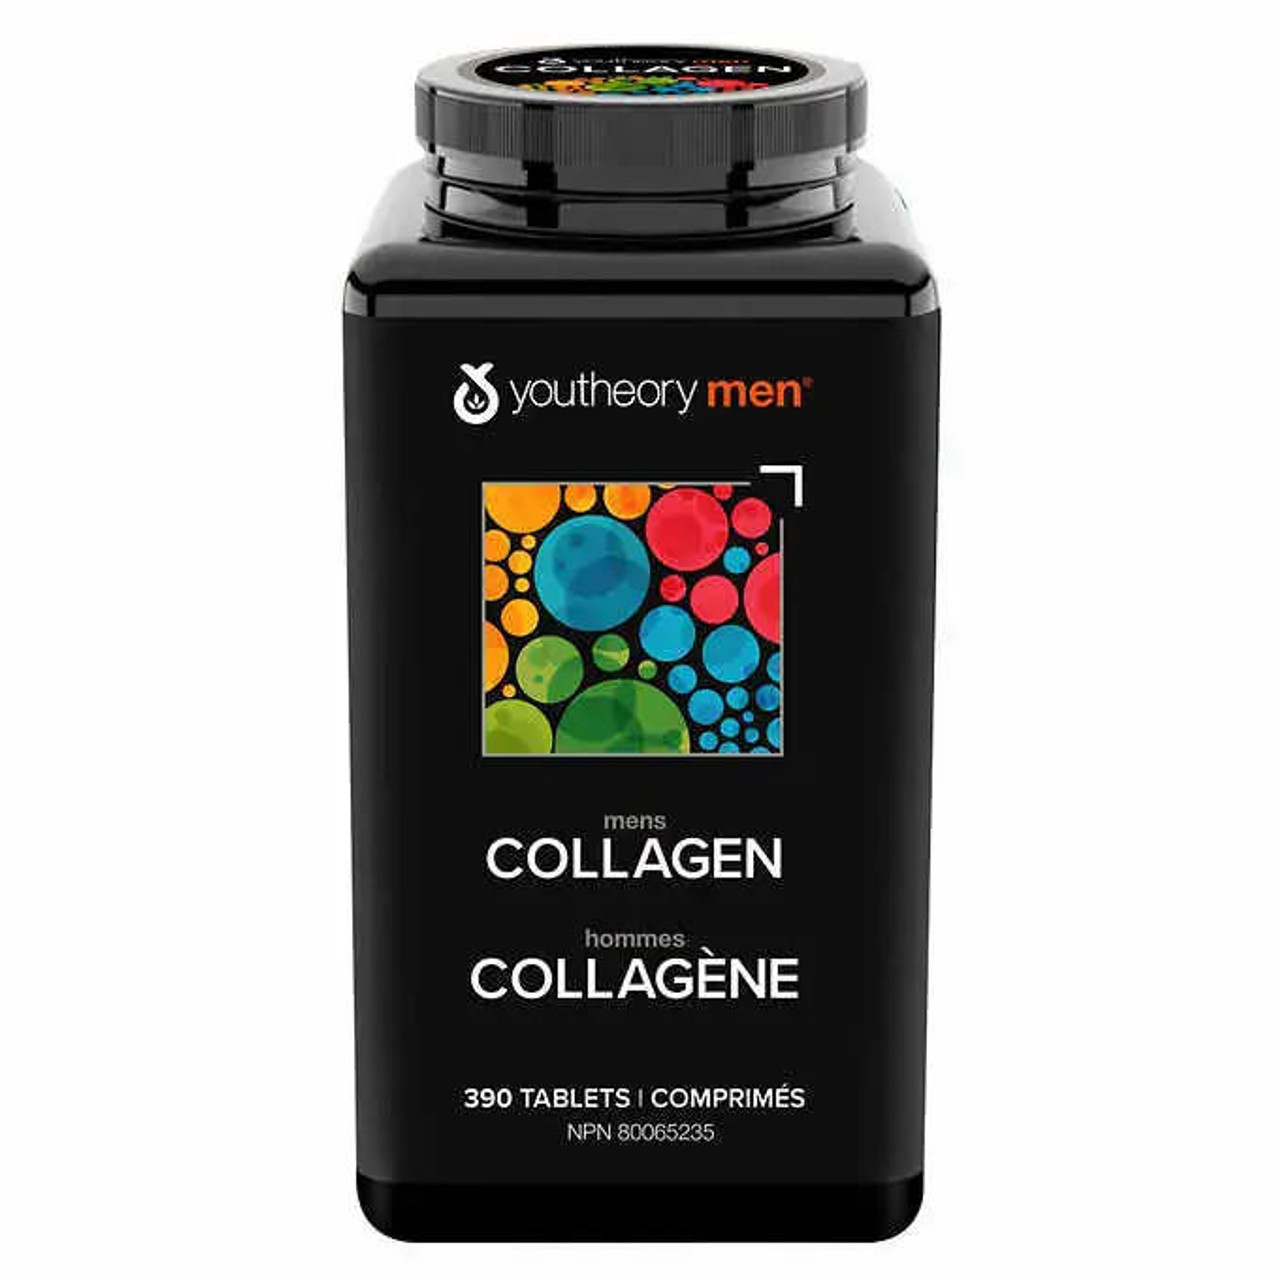  Youtheory Men's Collagen, 390 Tablets | Comprehensive Health and Vitality Support 